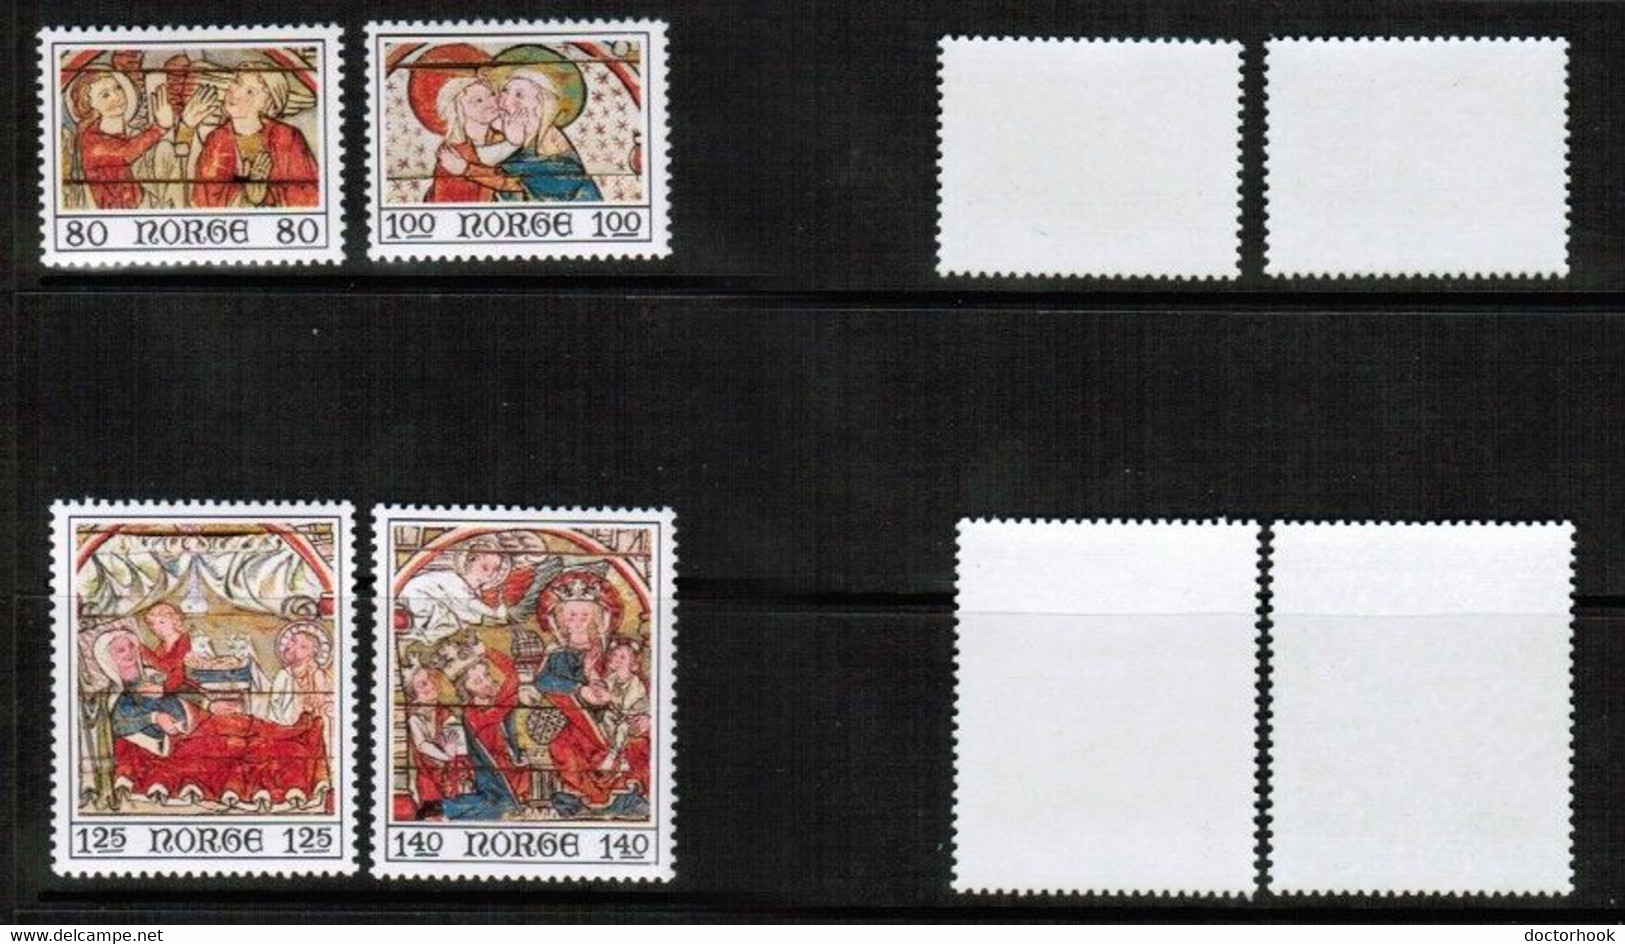 NORWAY  Scott # 665-8** MINT NH (CONDITION AS PER SCAN) (WW-1-134) - Unused Stamps